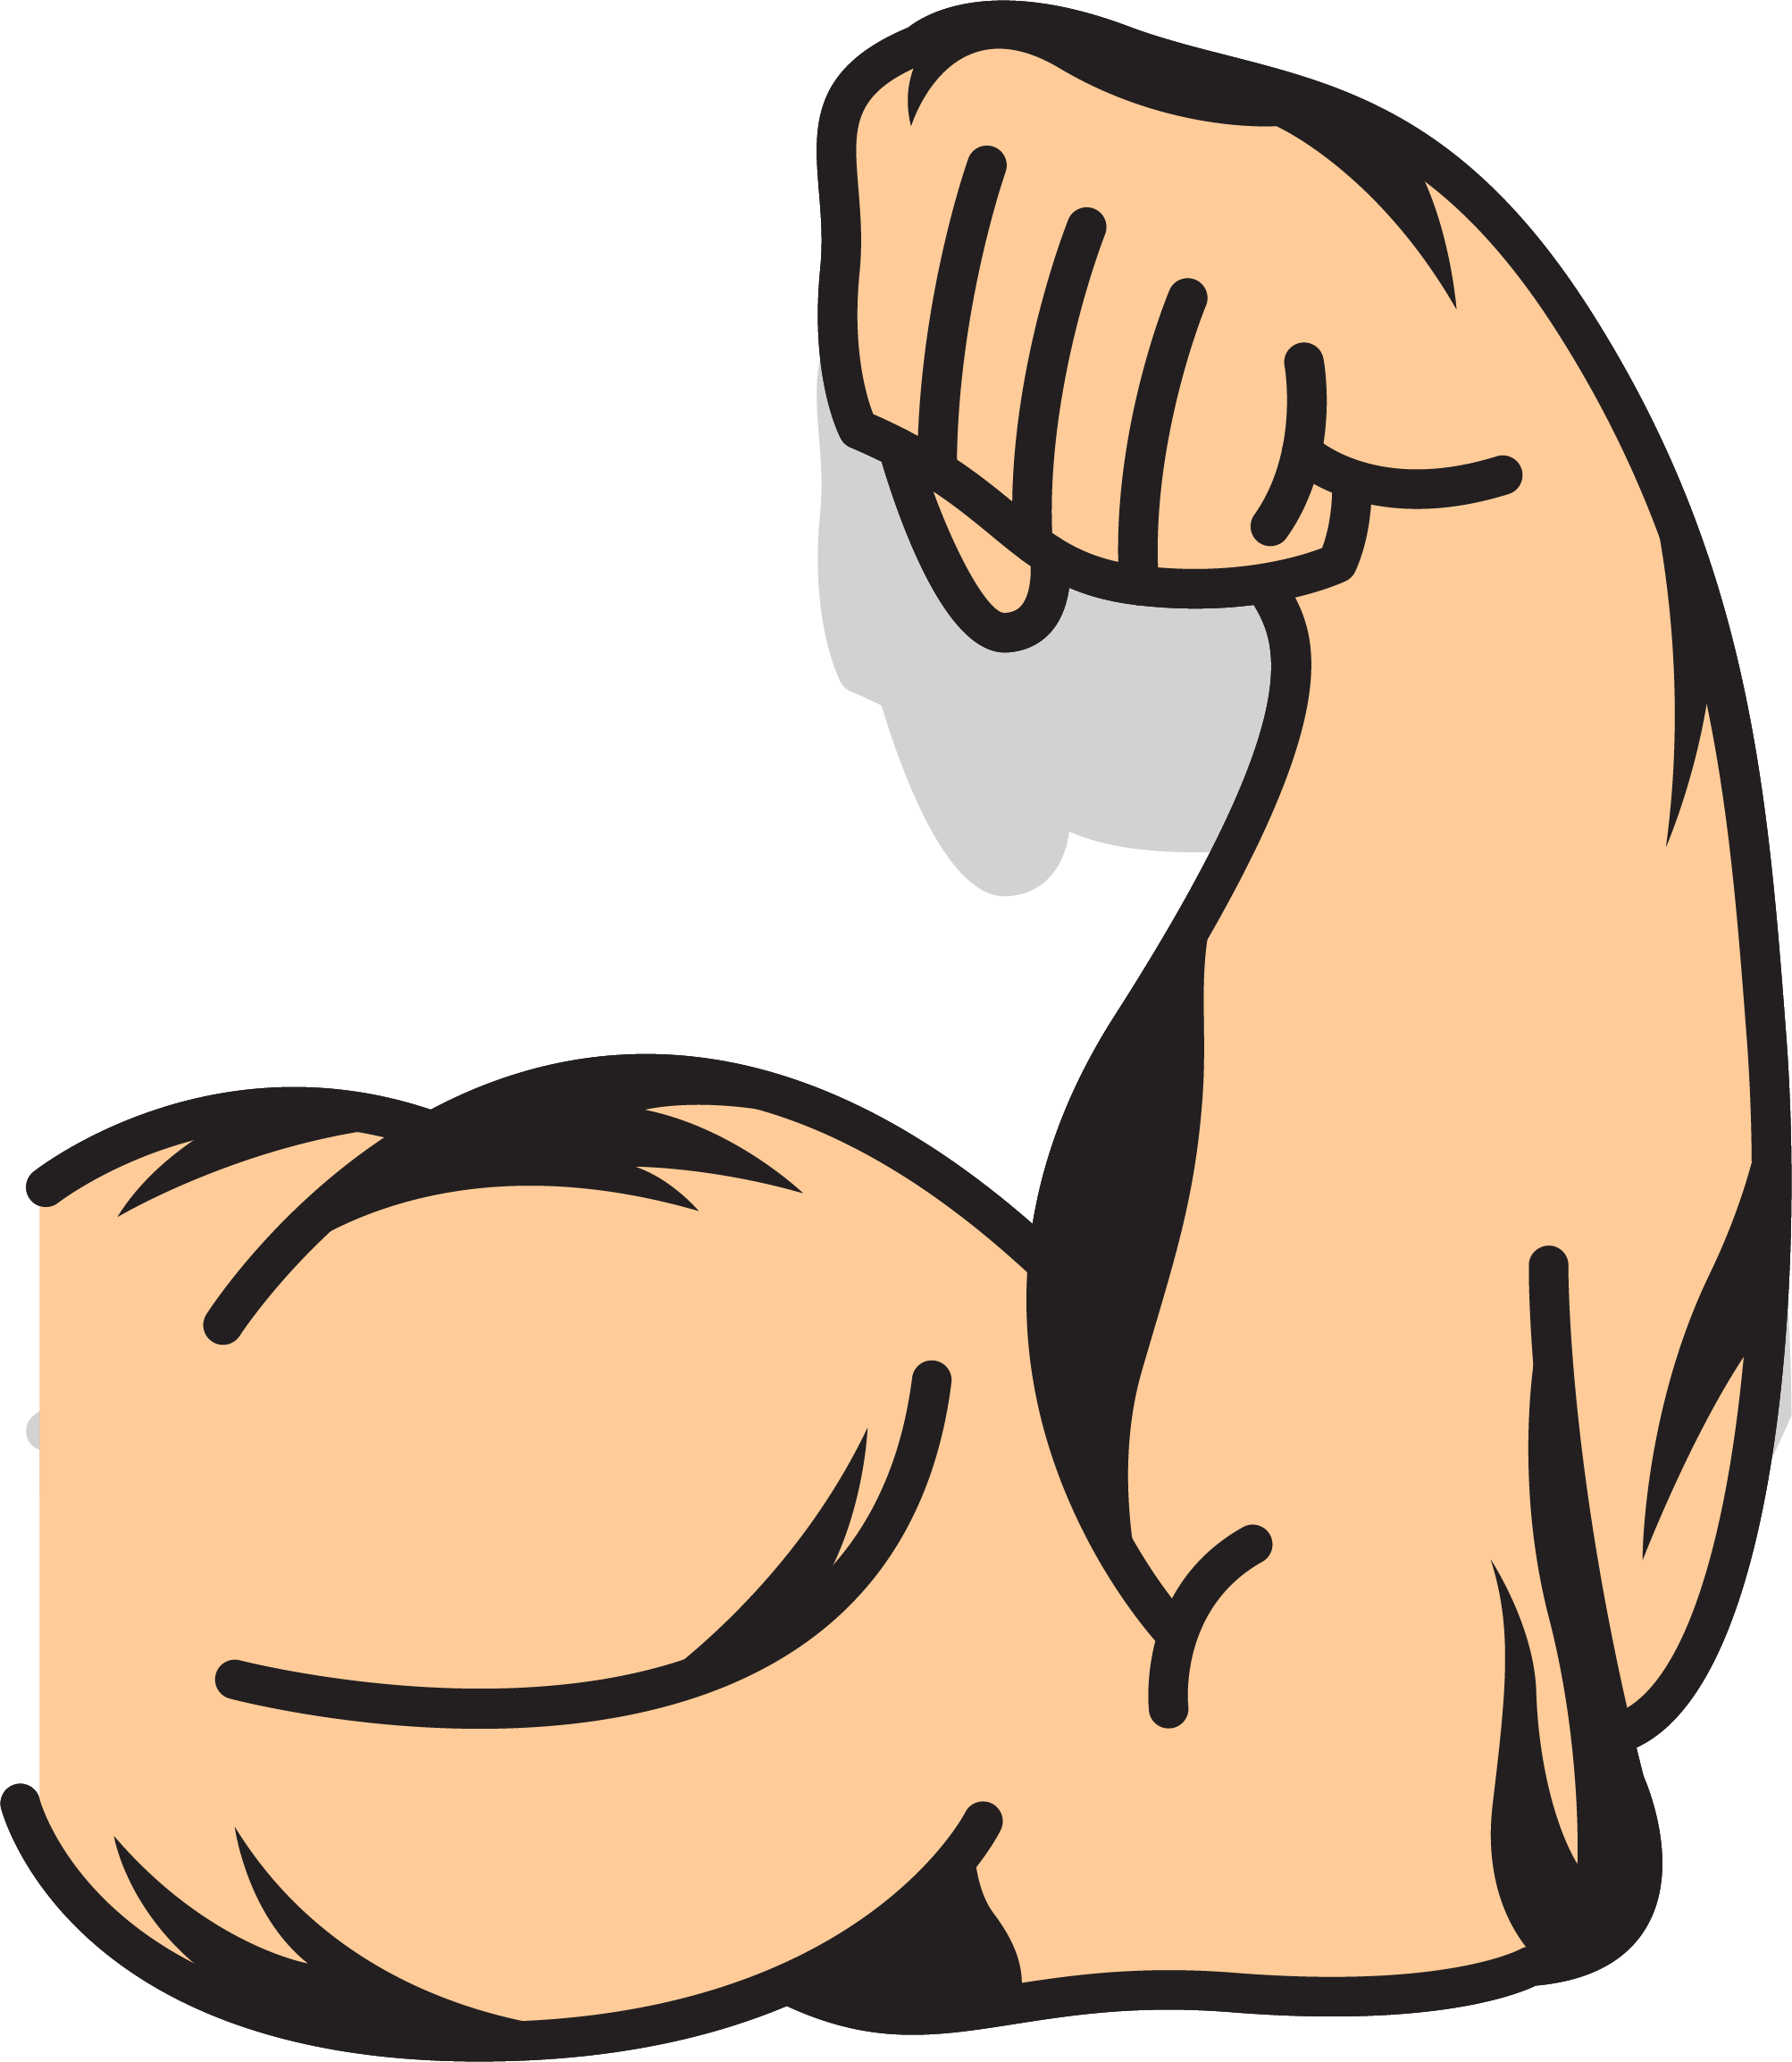 Muscle Arms Muscle Arms Clip Art - Cartoon Muscle Arm (2006x2308)